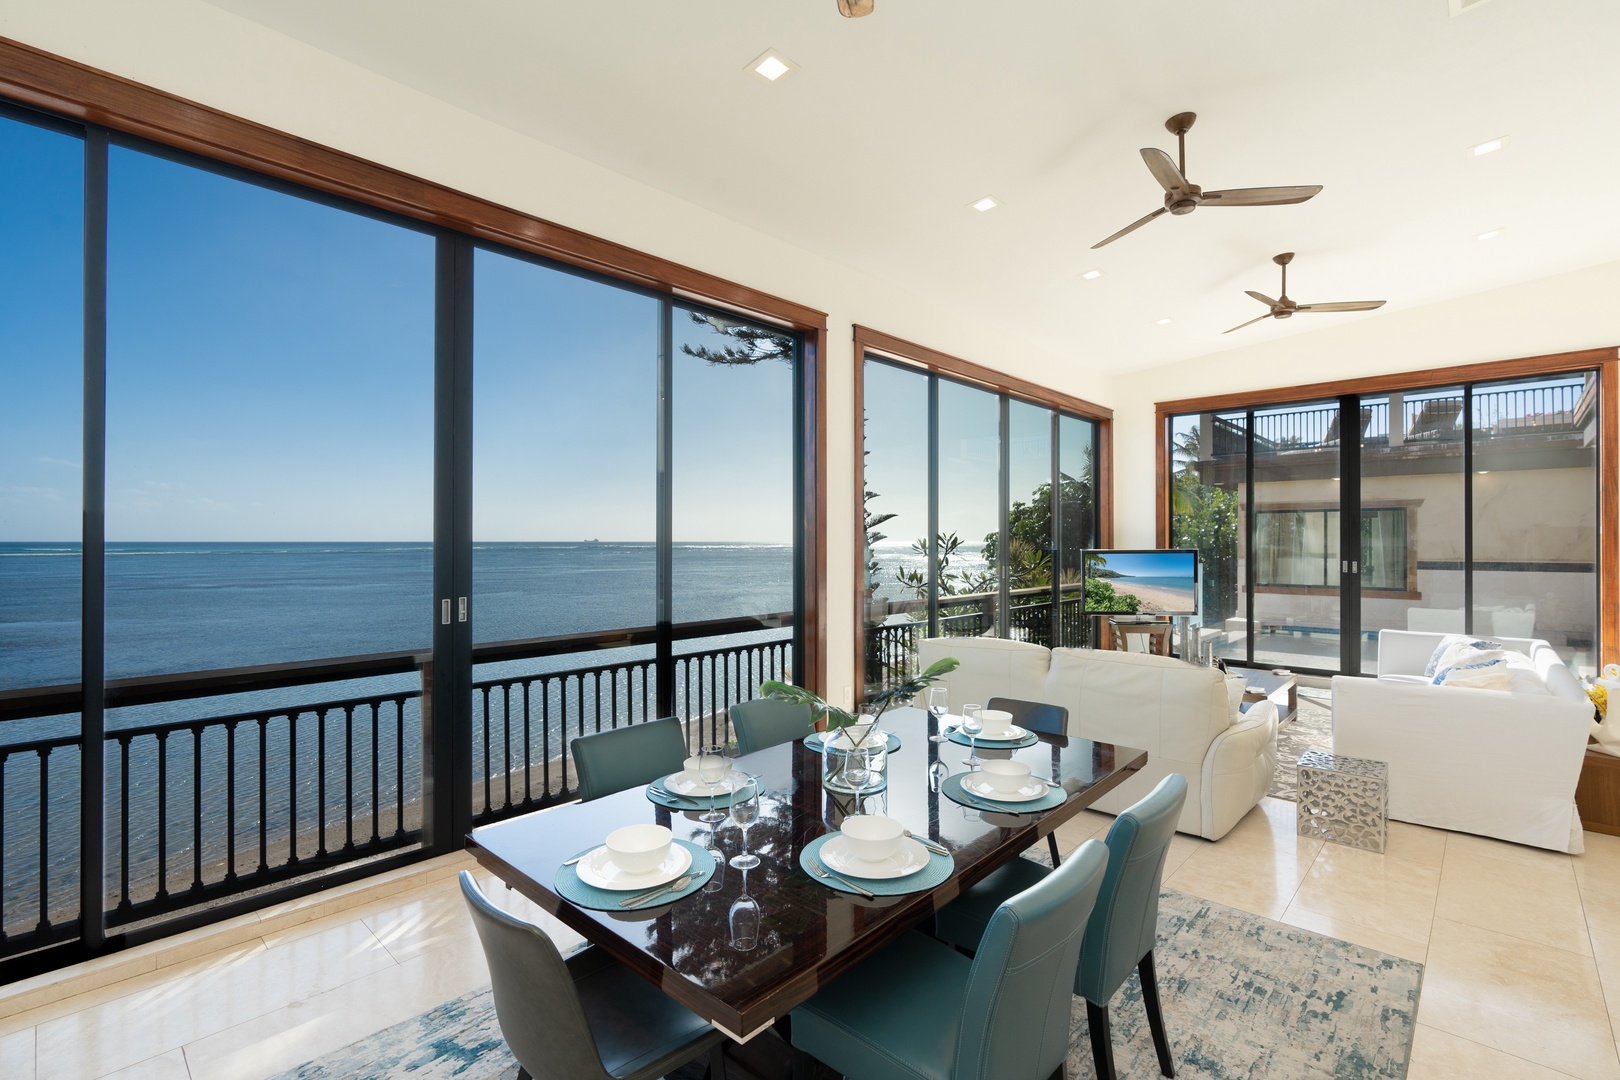 Honolulu Vacation Rentals, Wailupe Seaside - Gather together for meals with the most amazing views.